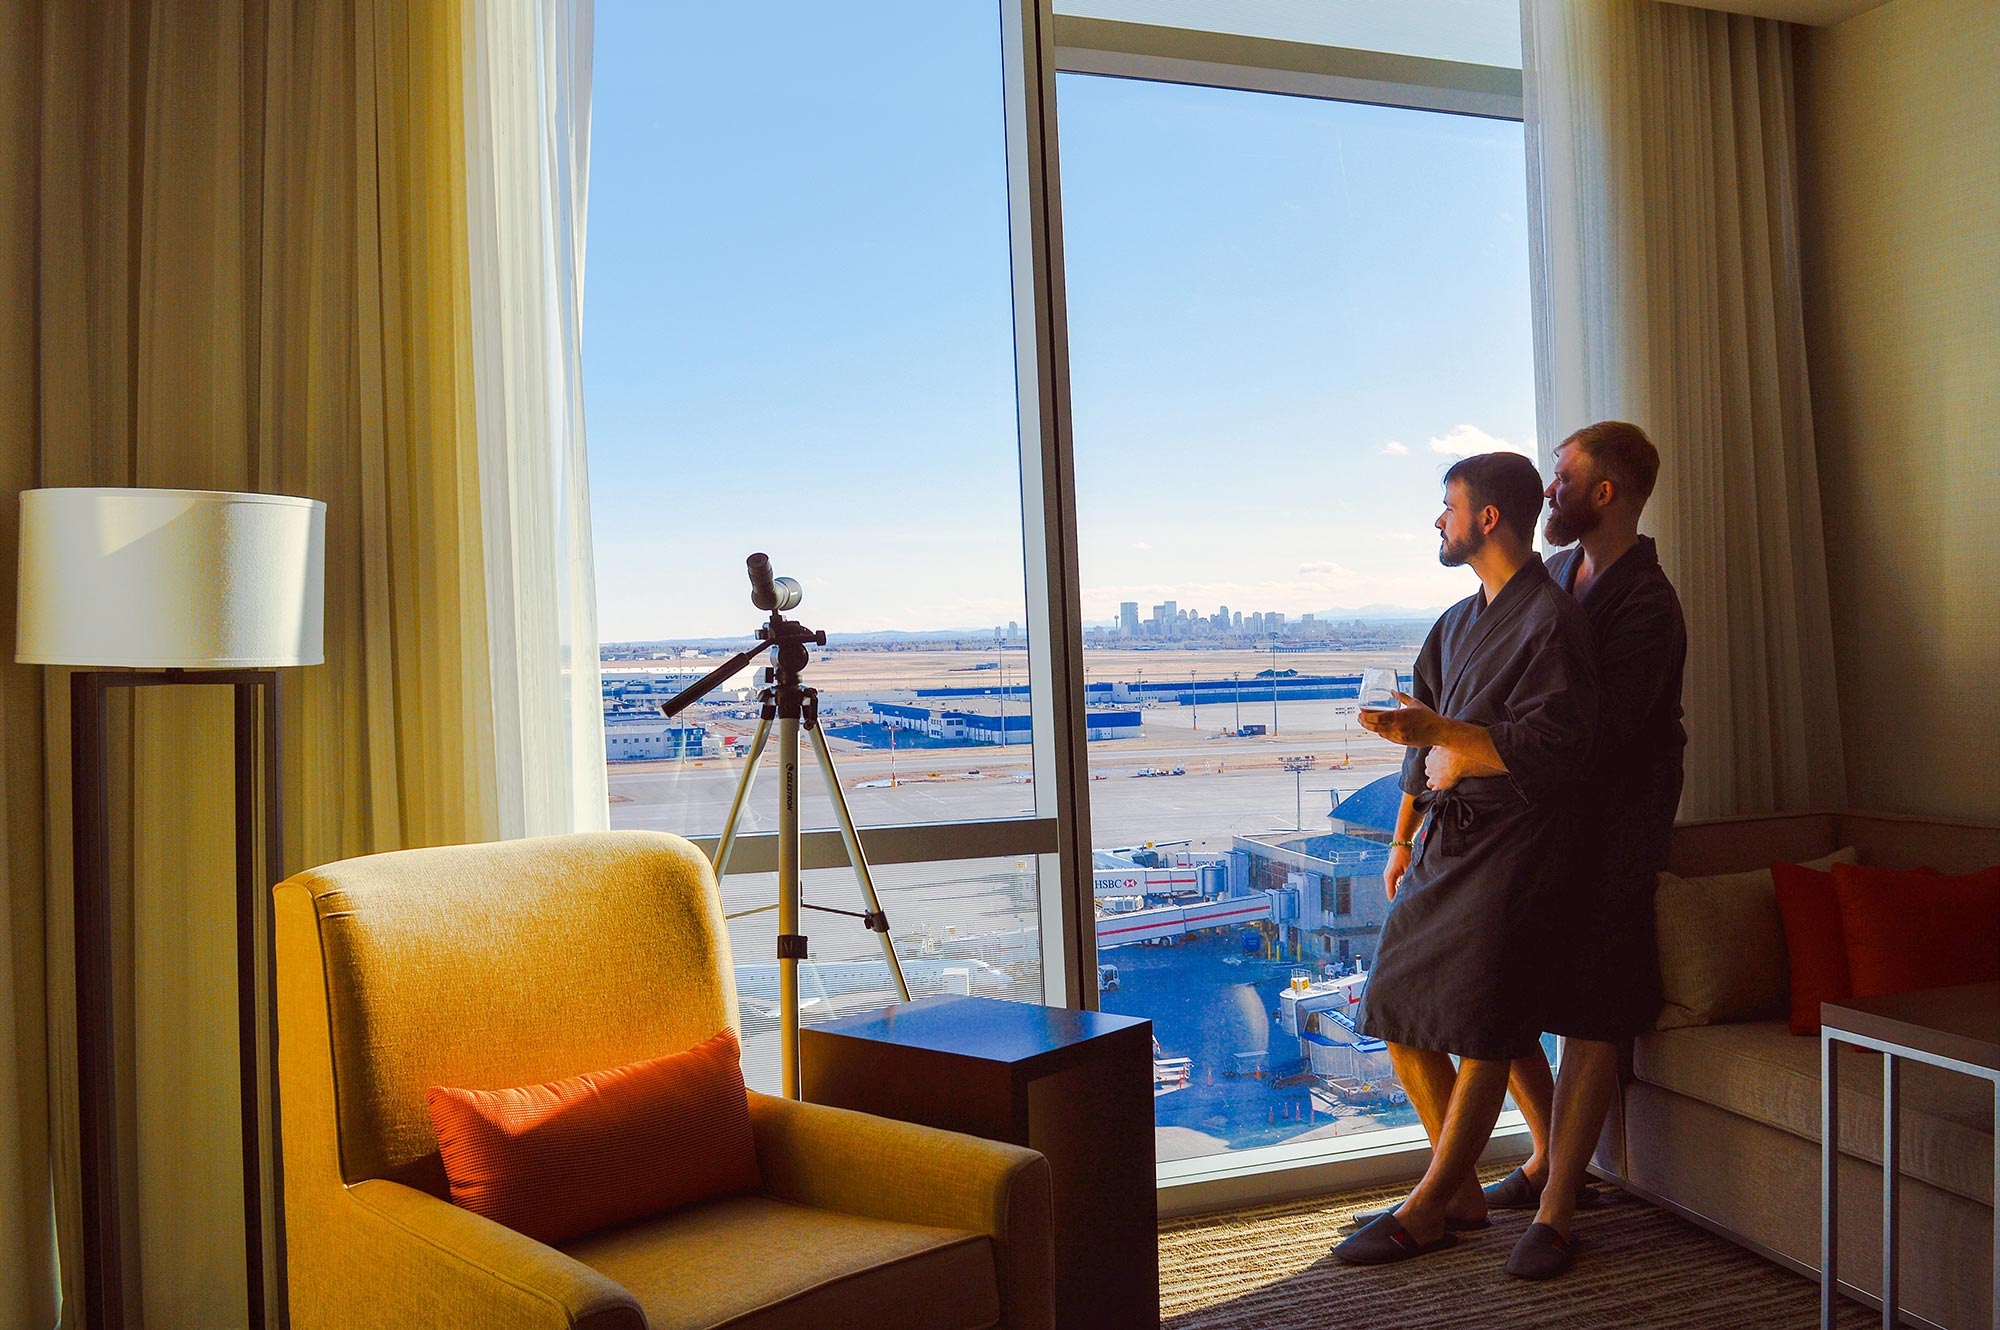 Treat yourself to an In-Terminal Marriott Hotel Stay at Calgary Airport | Canada